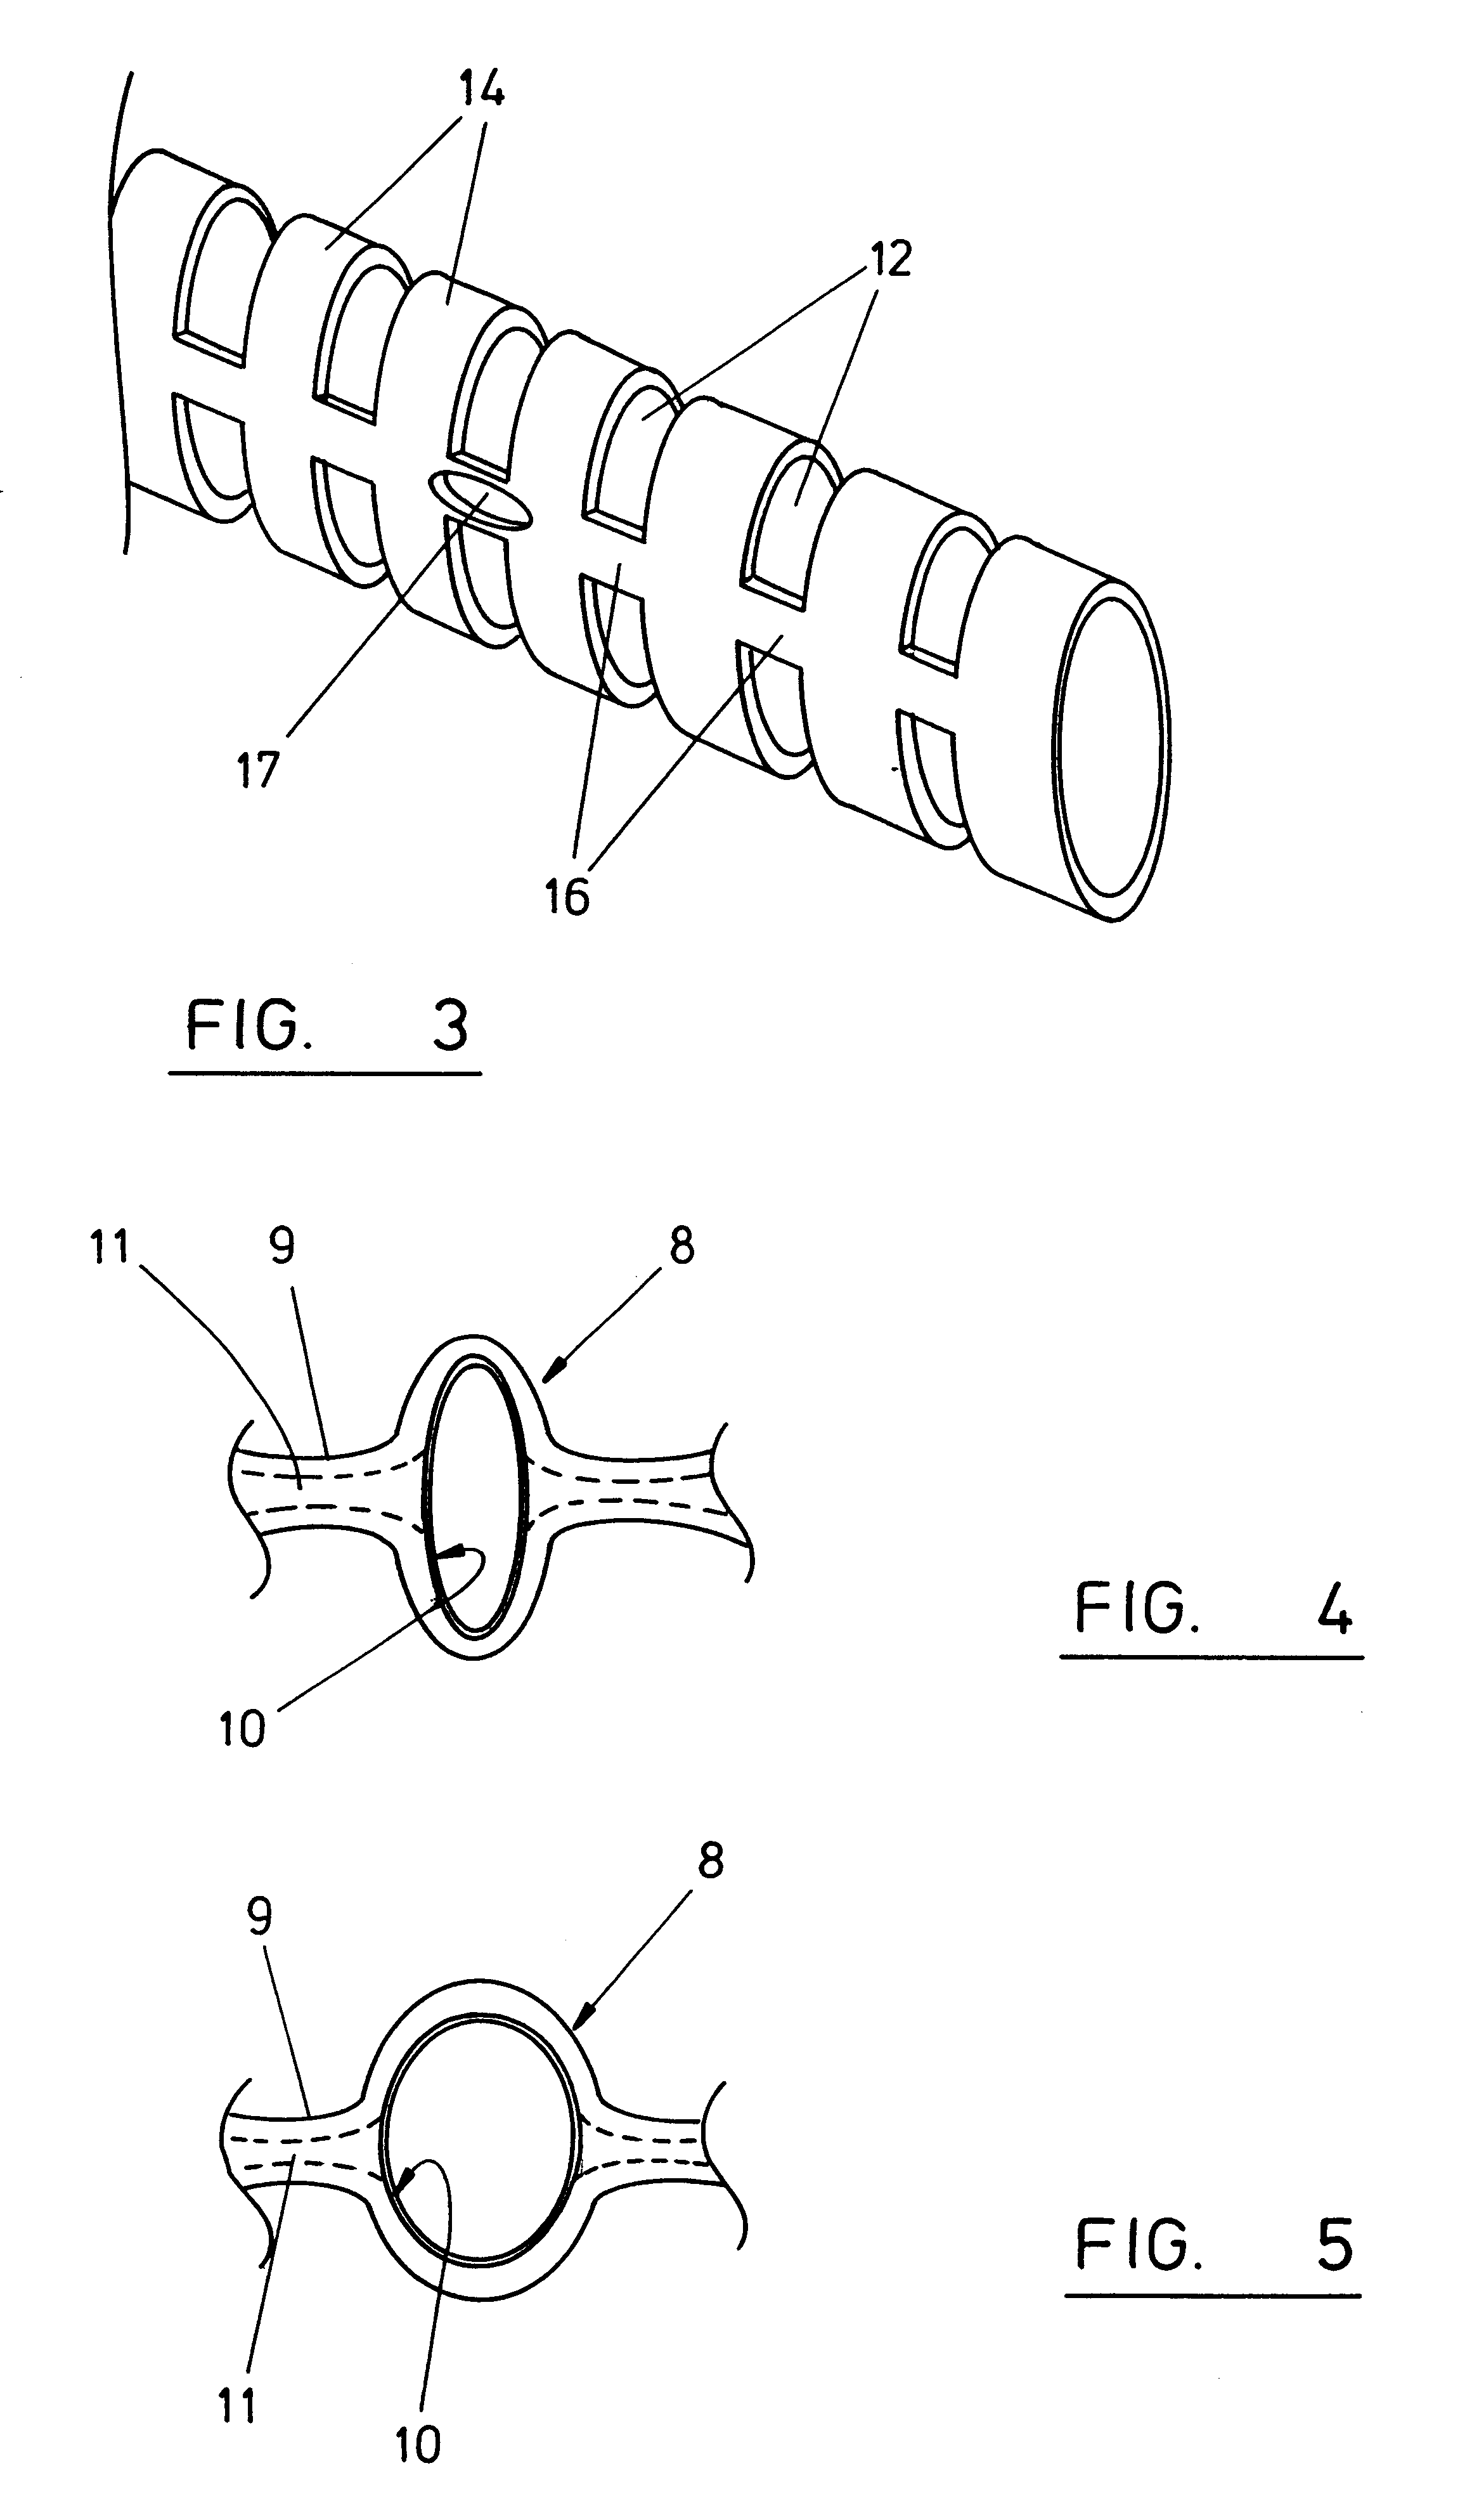 Urinary sphincter control device